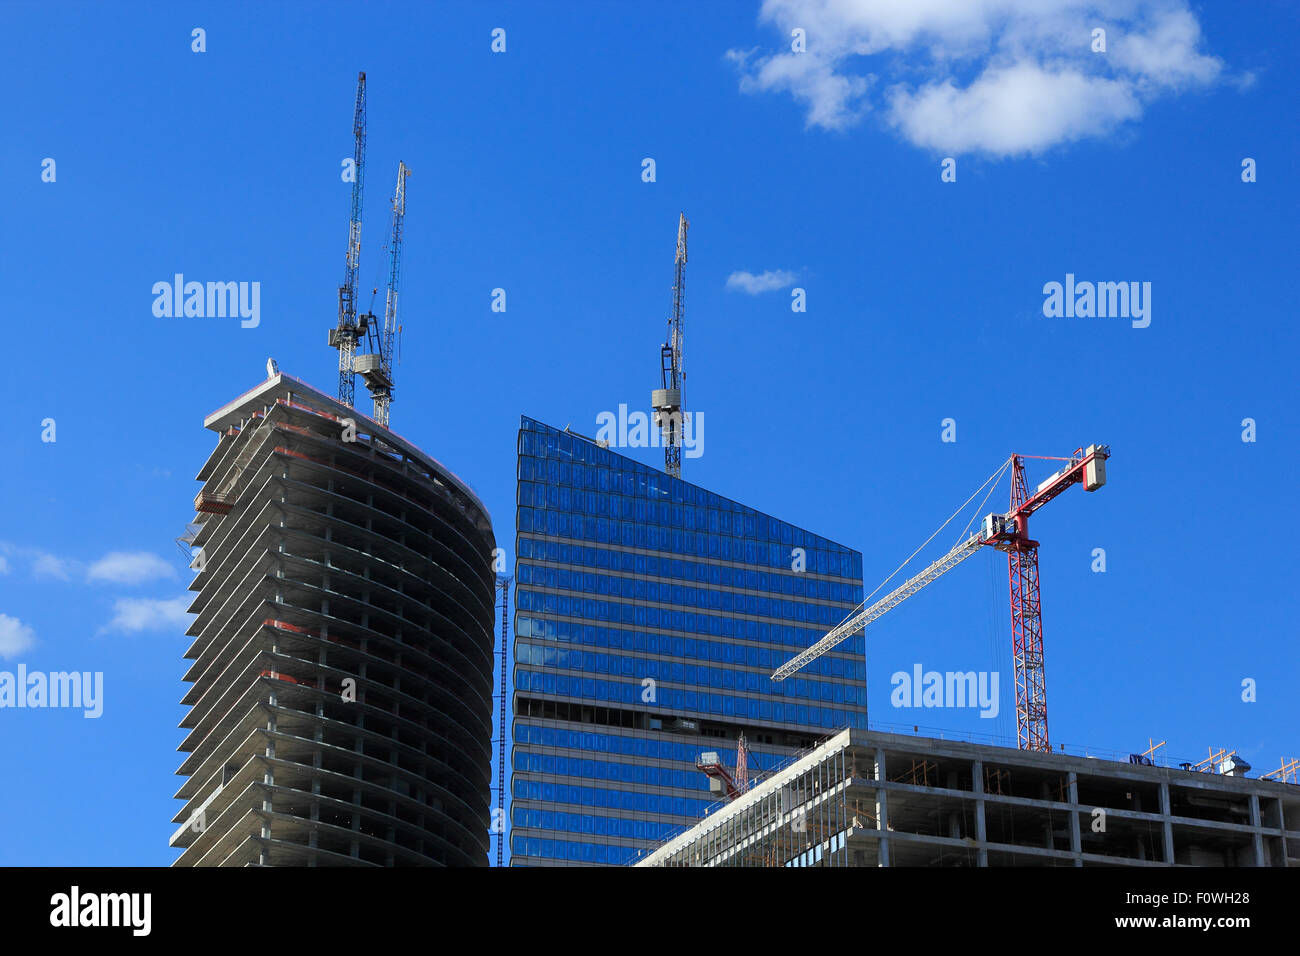 Several cranes working on a large construction site. Stock Photo